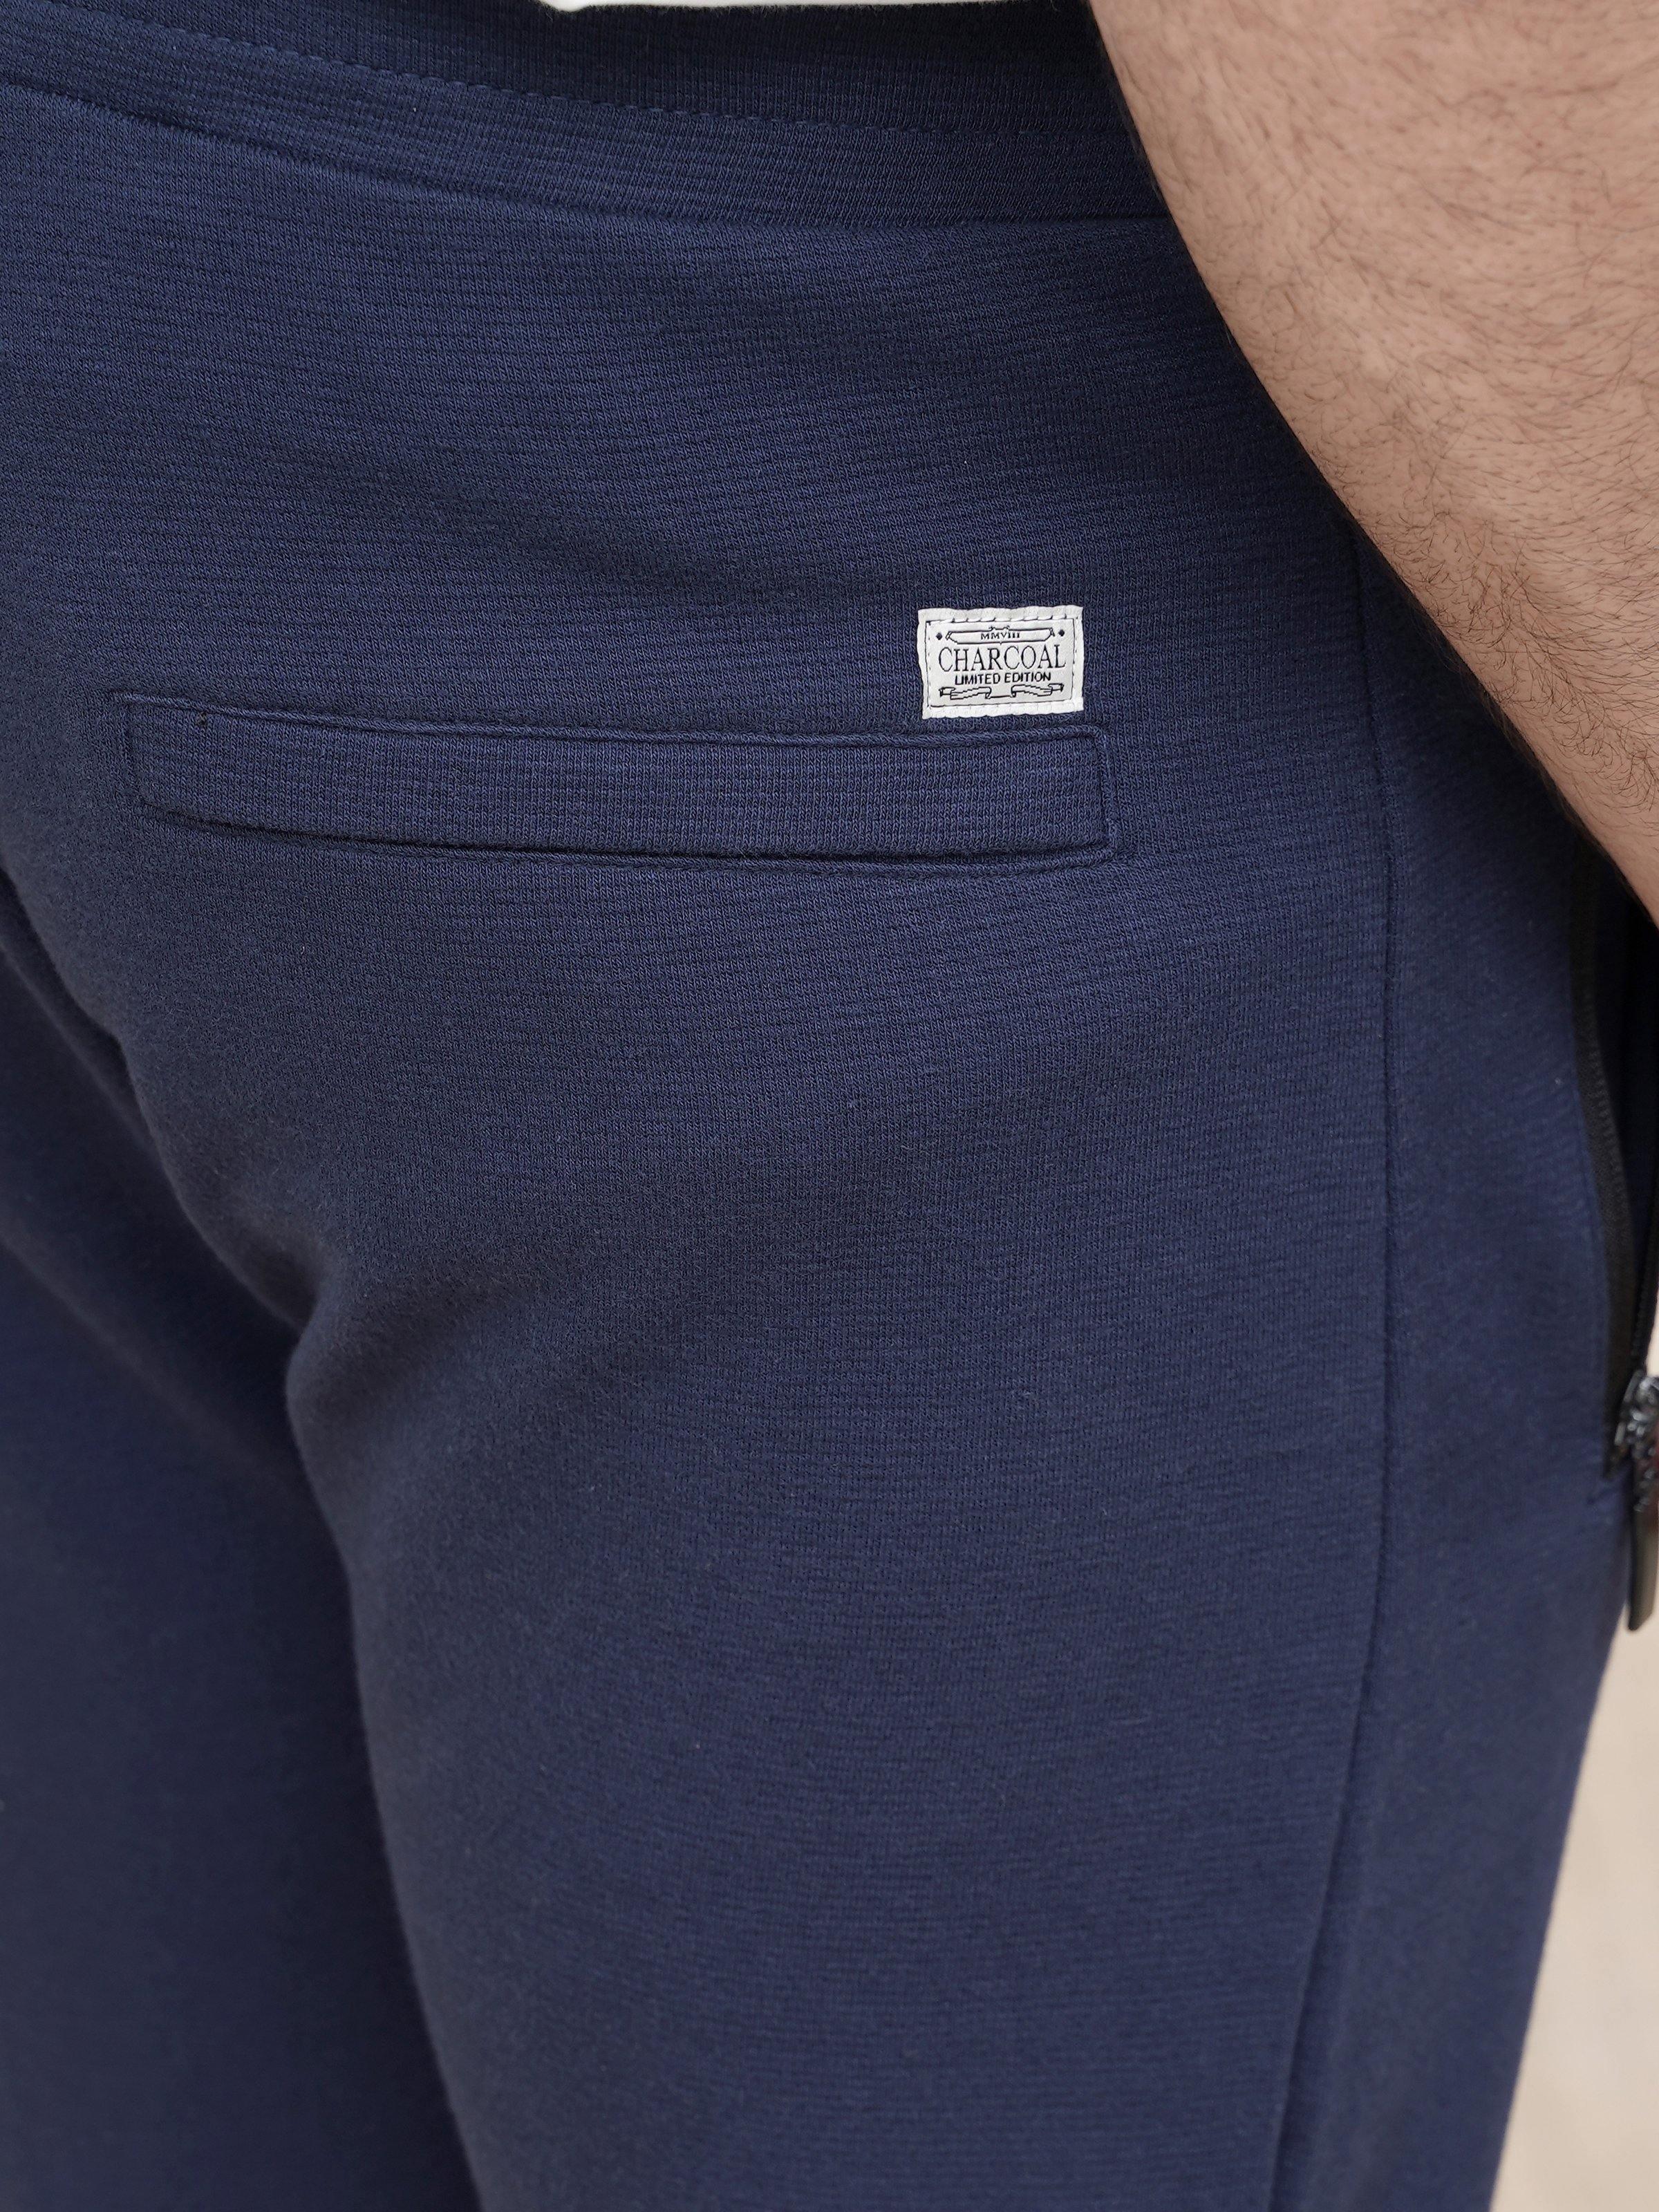 OTTOMAN JOGGER TROUSER DARK BLUE at Charcoal Clothing